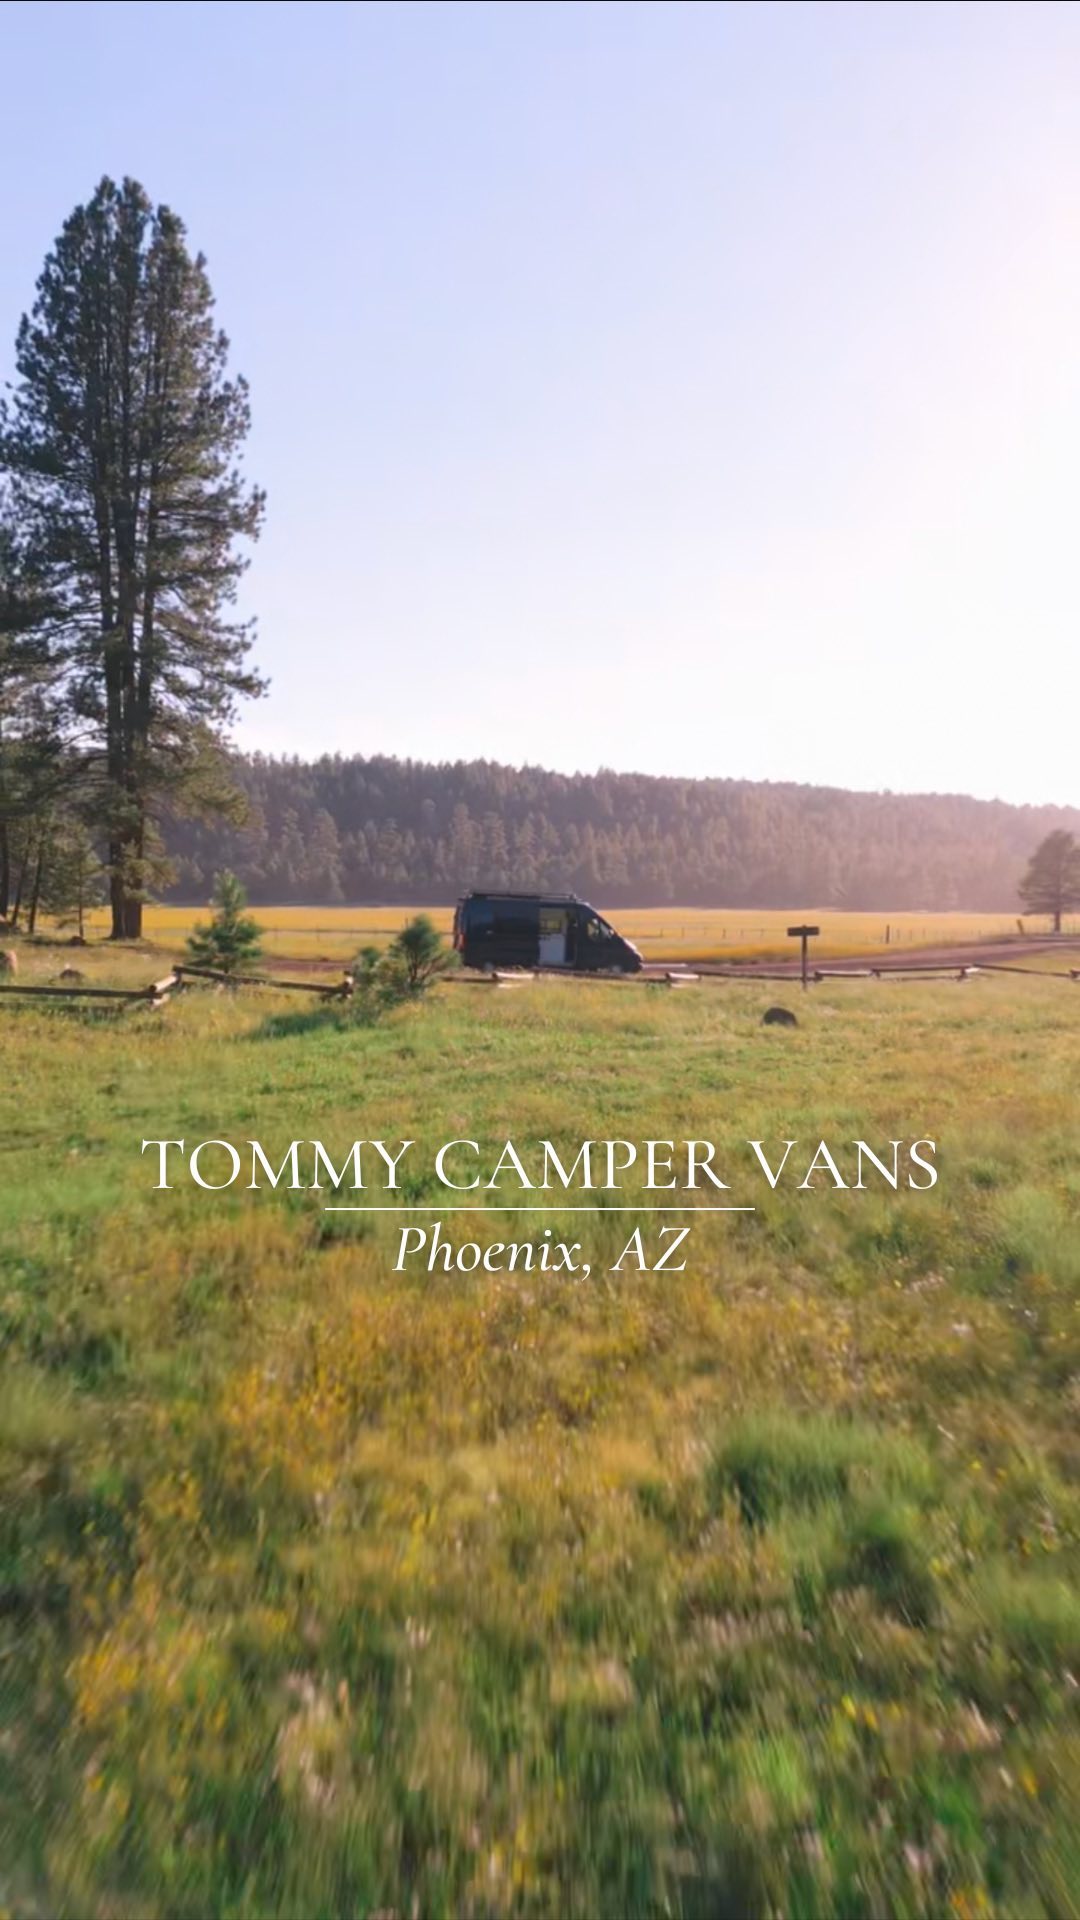 With @tommycampervans you can explore like never before 🤩 Enjoy comforts of home while being submersed in nature 🌲